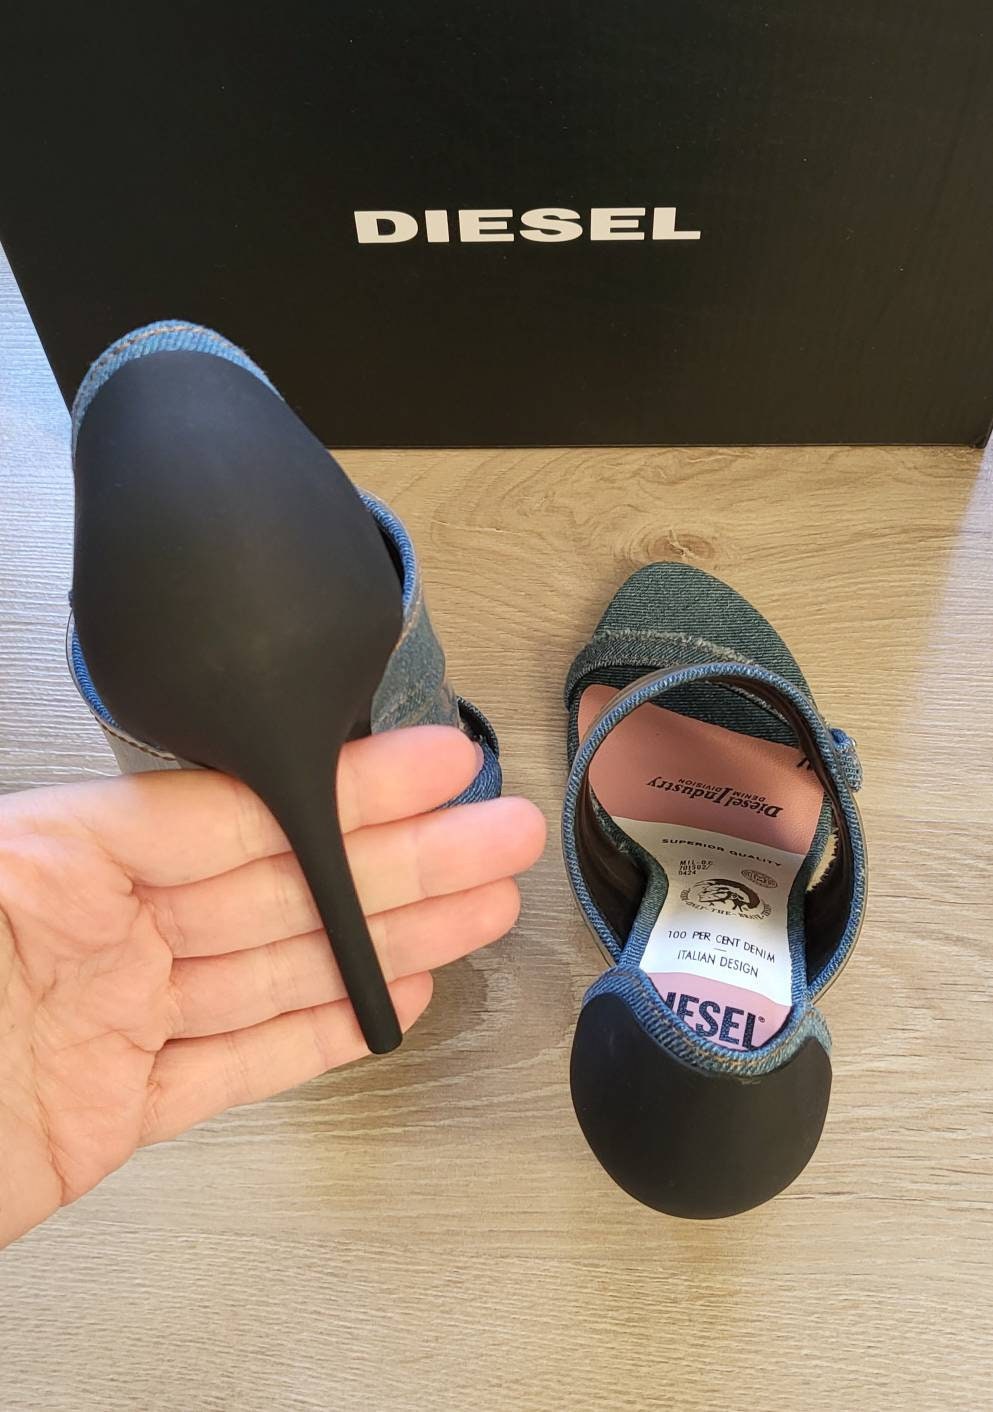 New and used Diesel Women's Shoes for sale | Facebook Marketplace